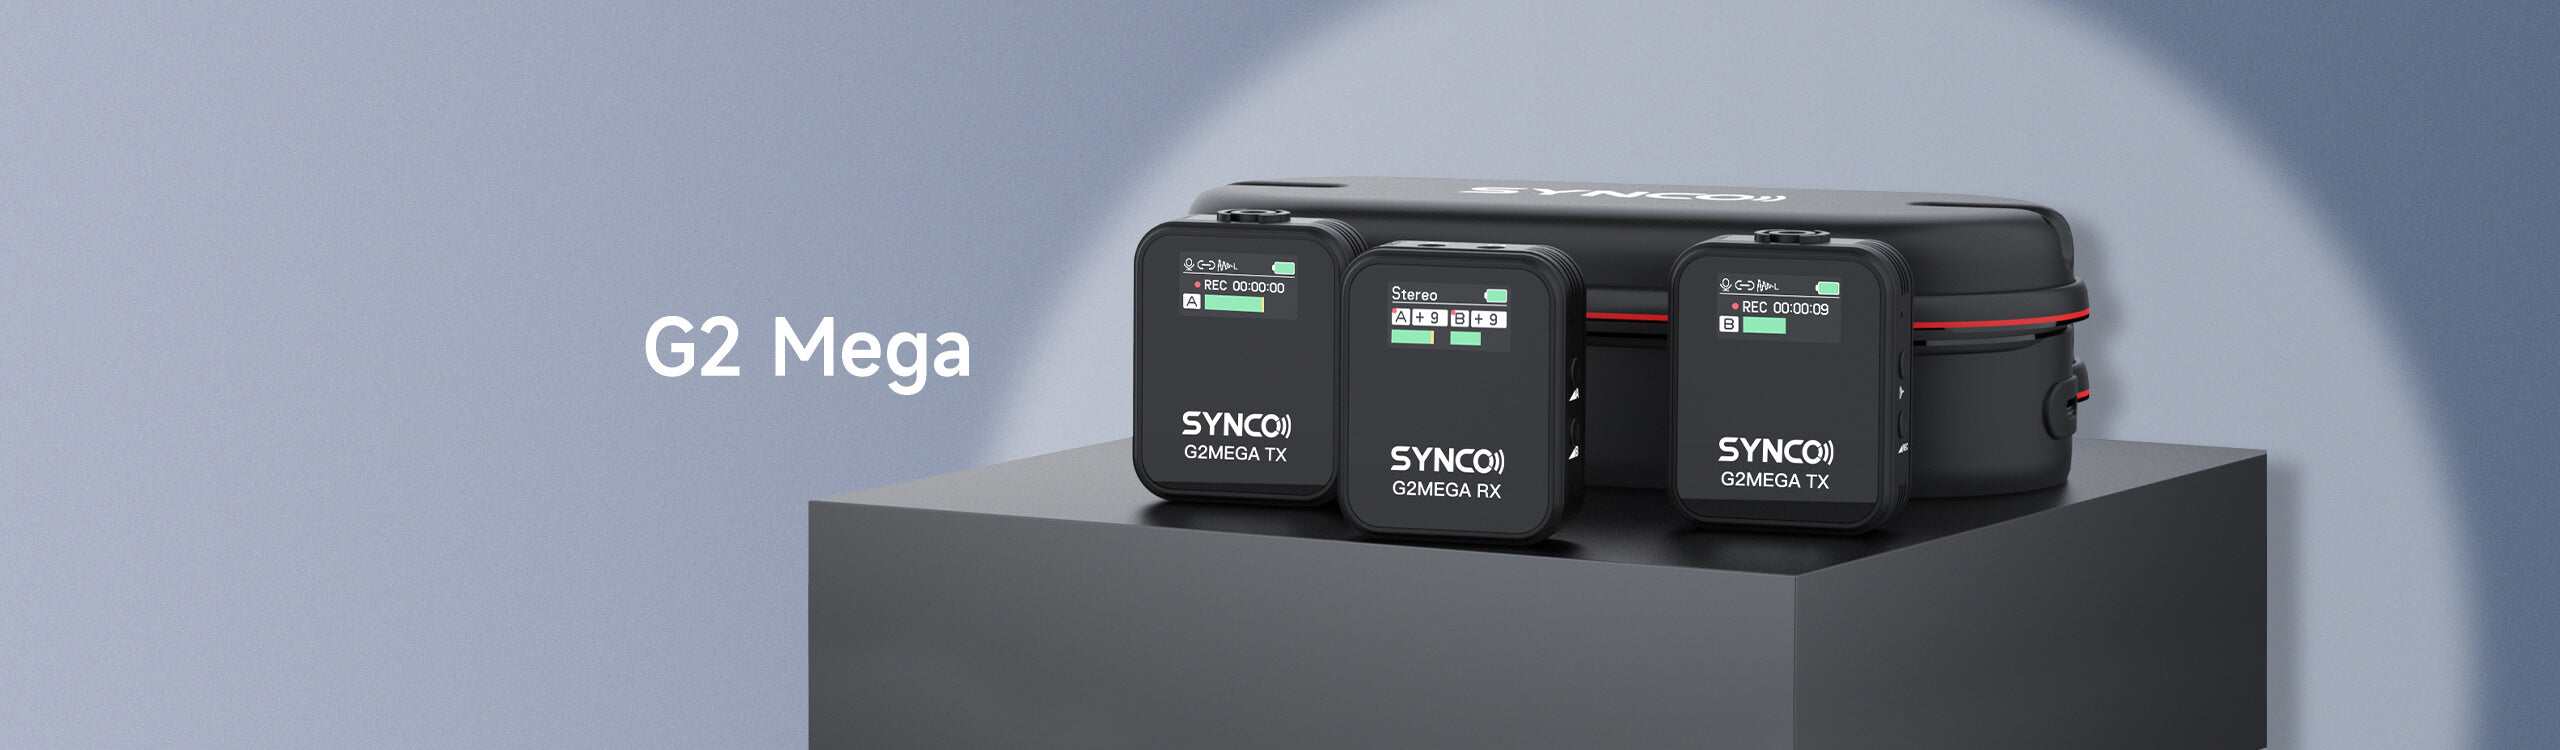 Wireless Microphones for Filming SYNCO G2 Mega, Charging Case Included